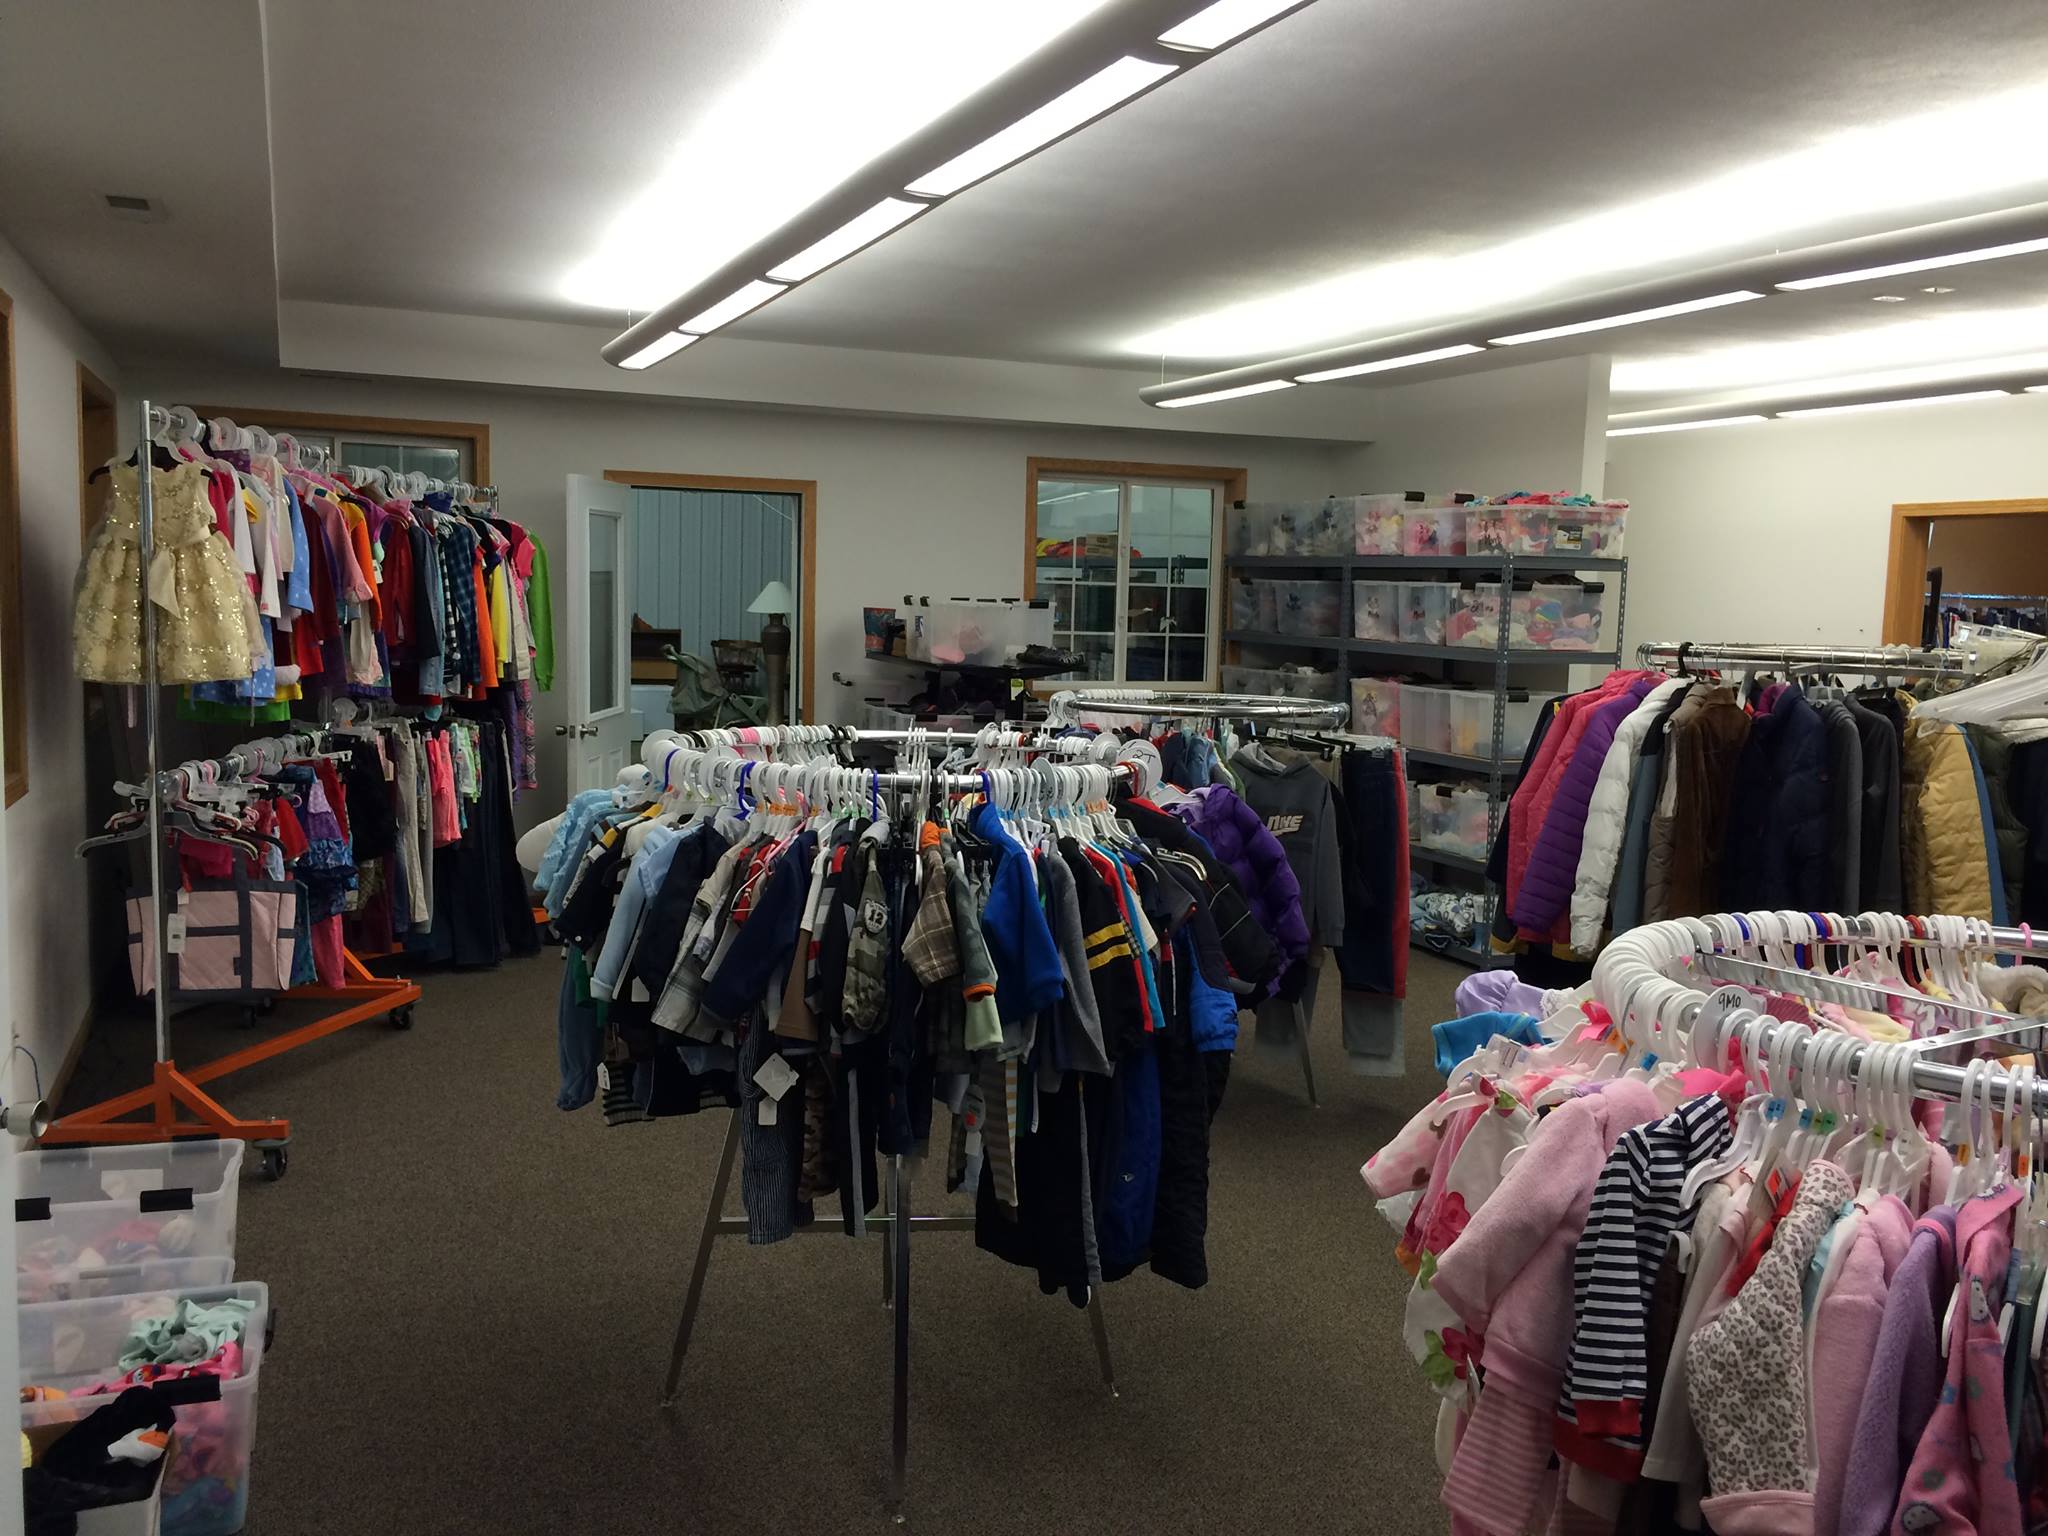 The Clickstop Cares Closet serves area families and individual in needs, with gently used clothing, shoes, and housewares.